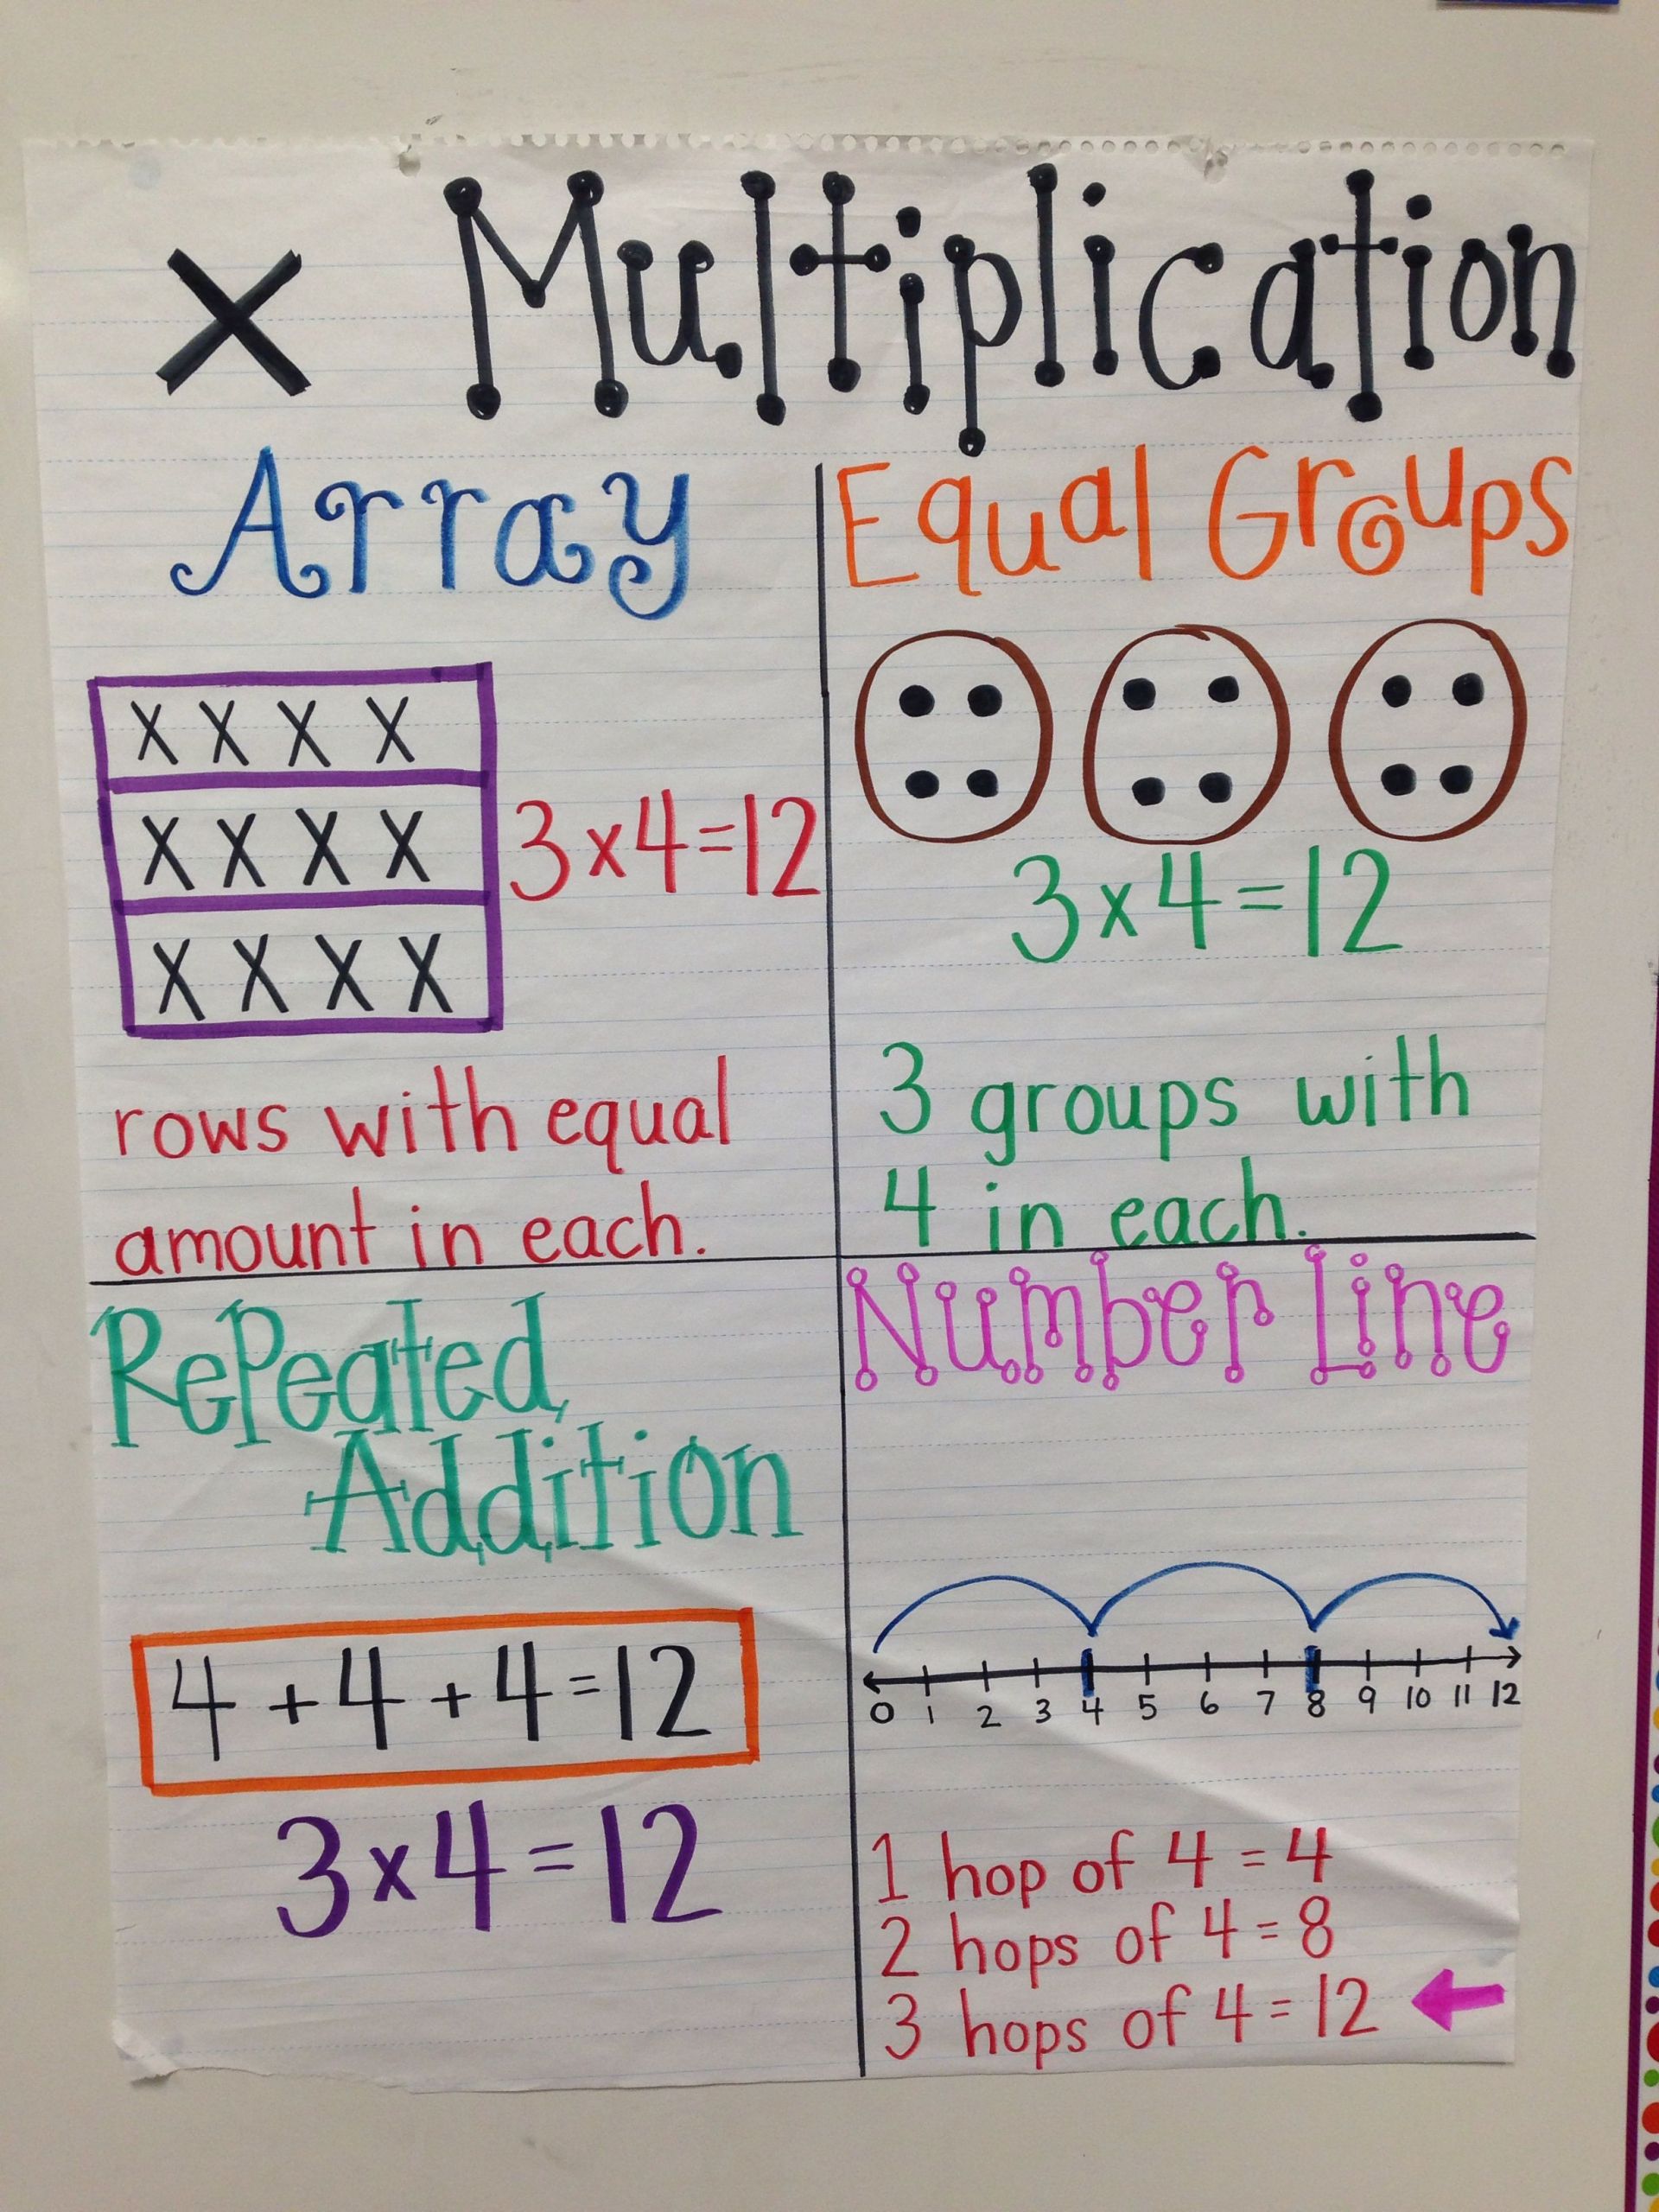 Free Math Worksheets Second Grade 2 Addition Adding whole Tens 4 Addends Missing Number